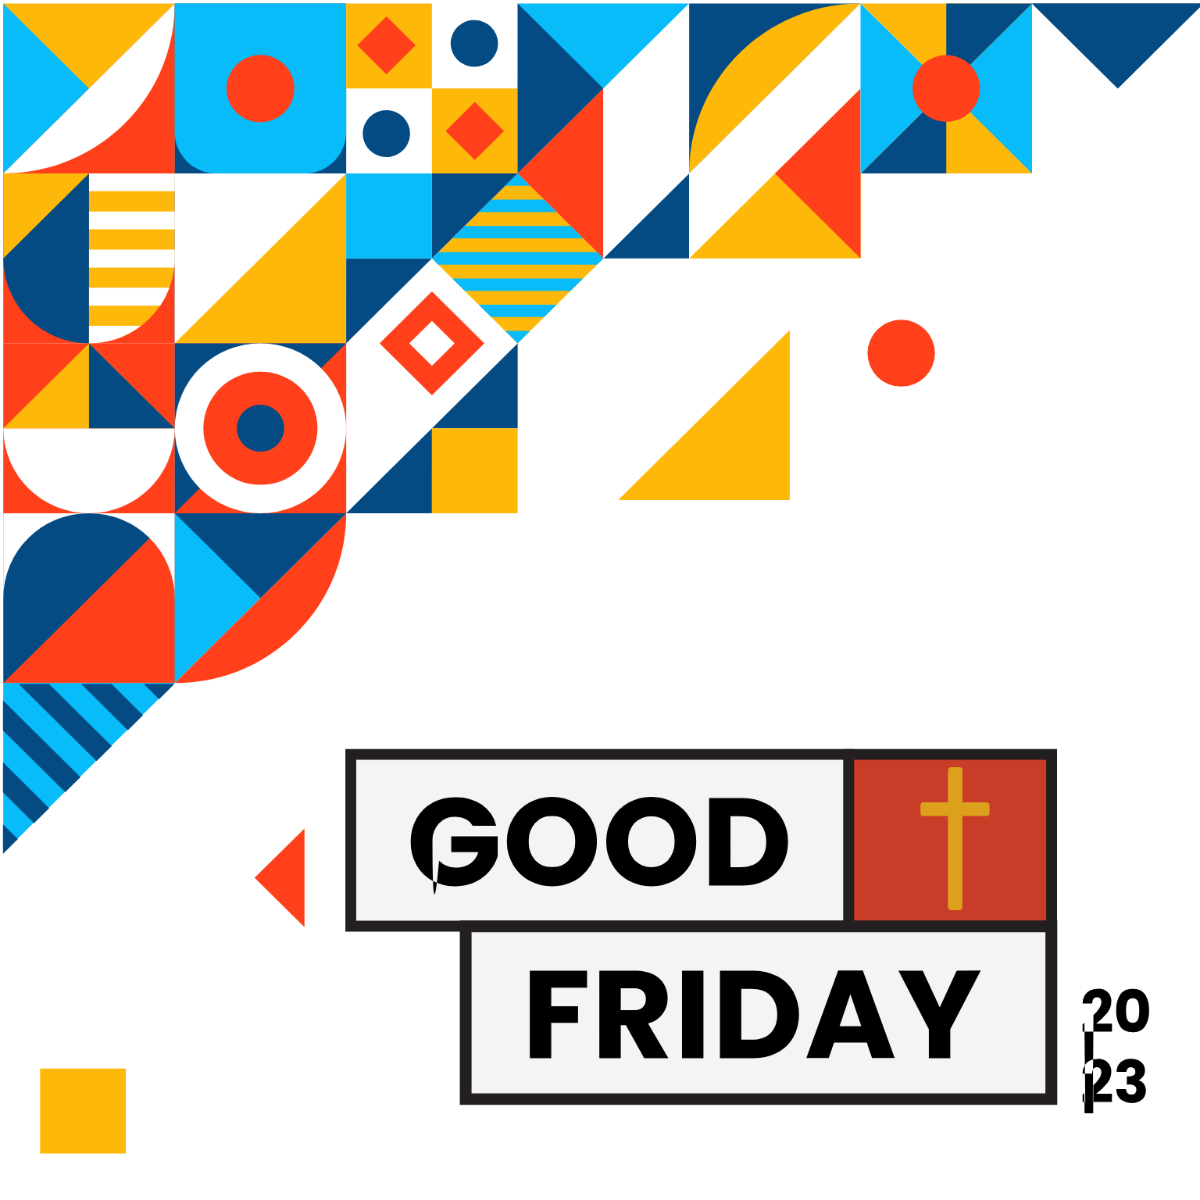 Good Friday Event Vector